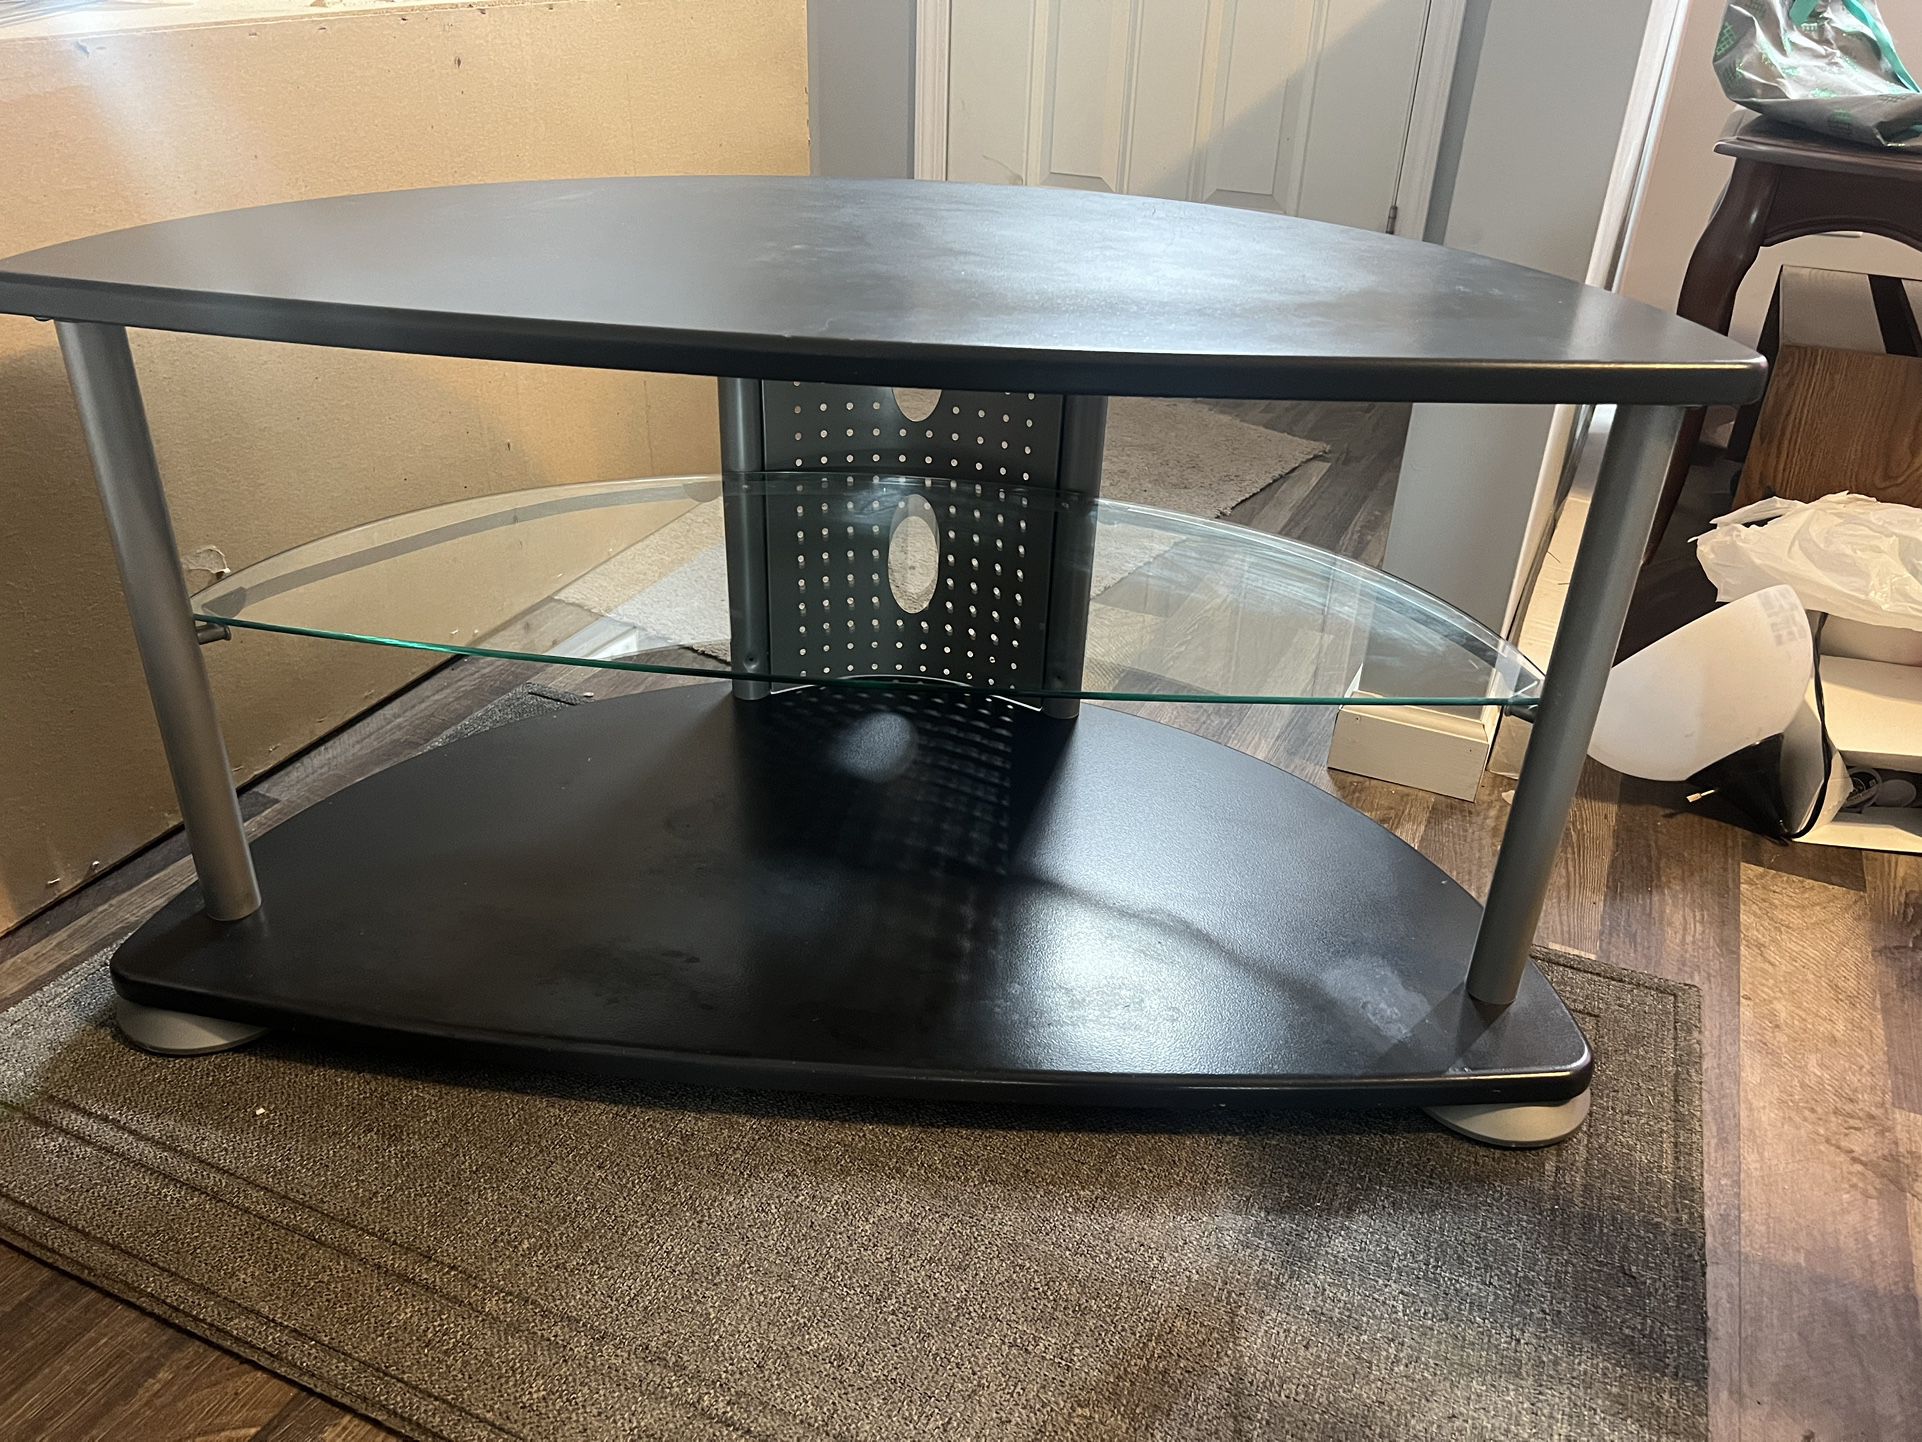 Tv Stand - With Glass Shelving - Fits Up To A 43” Tv 